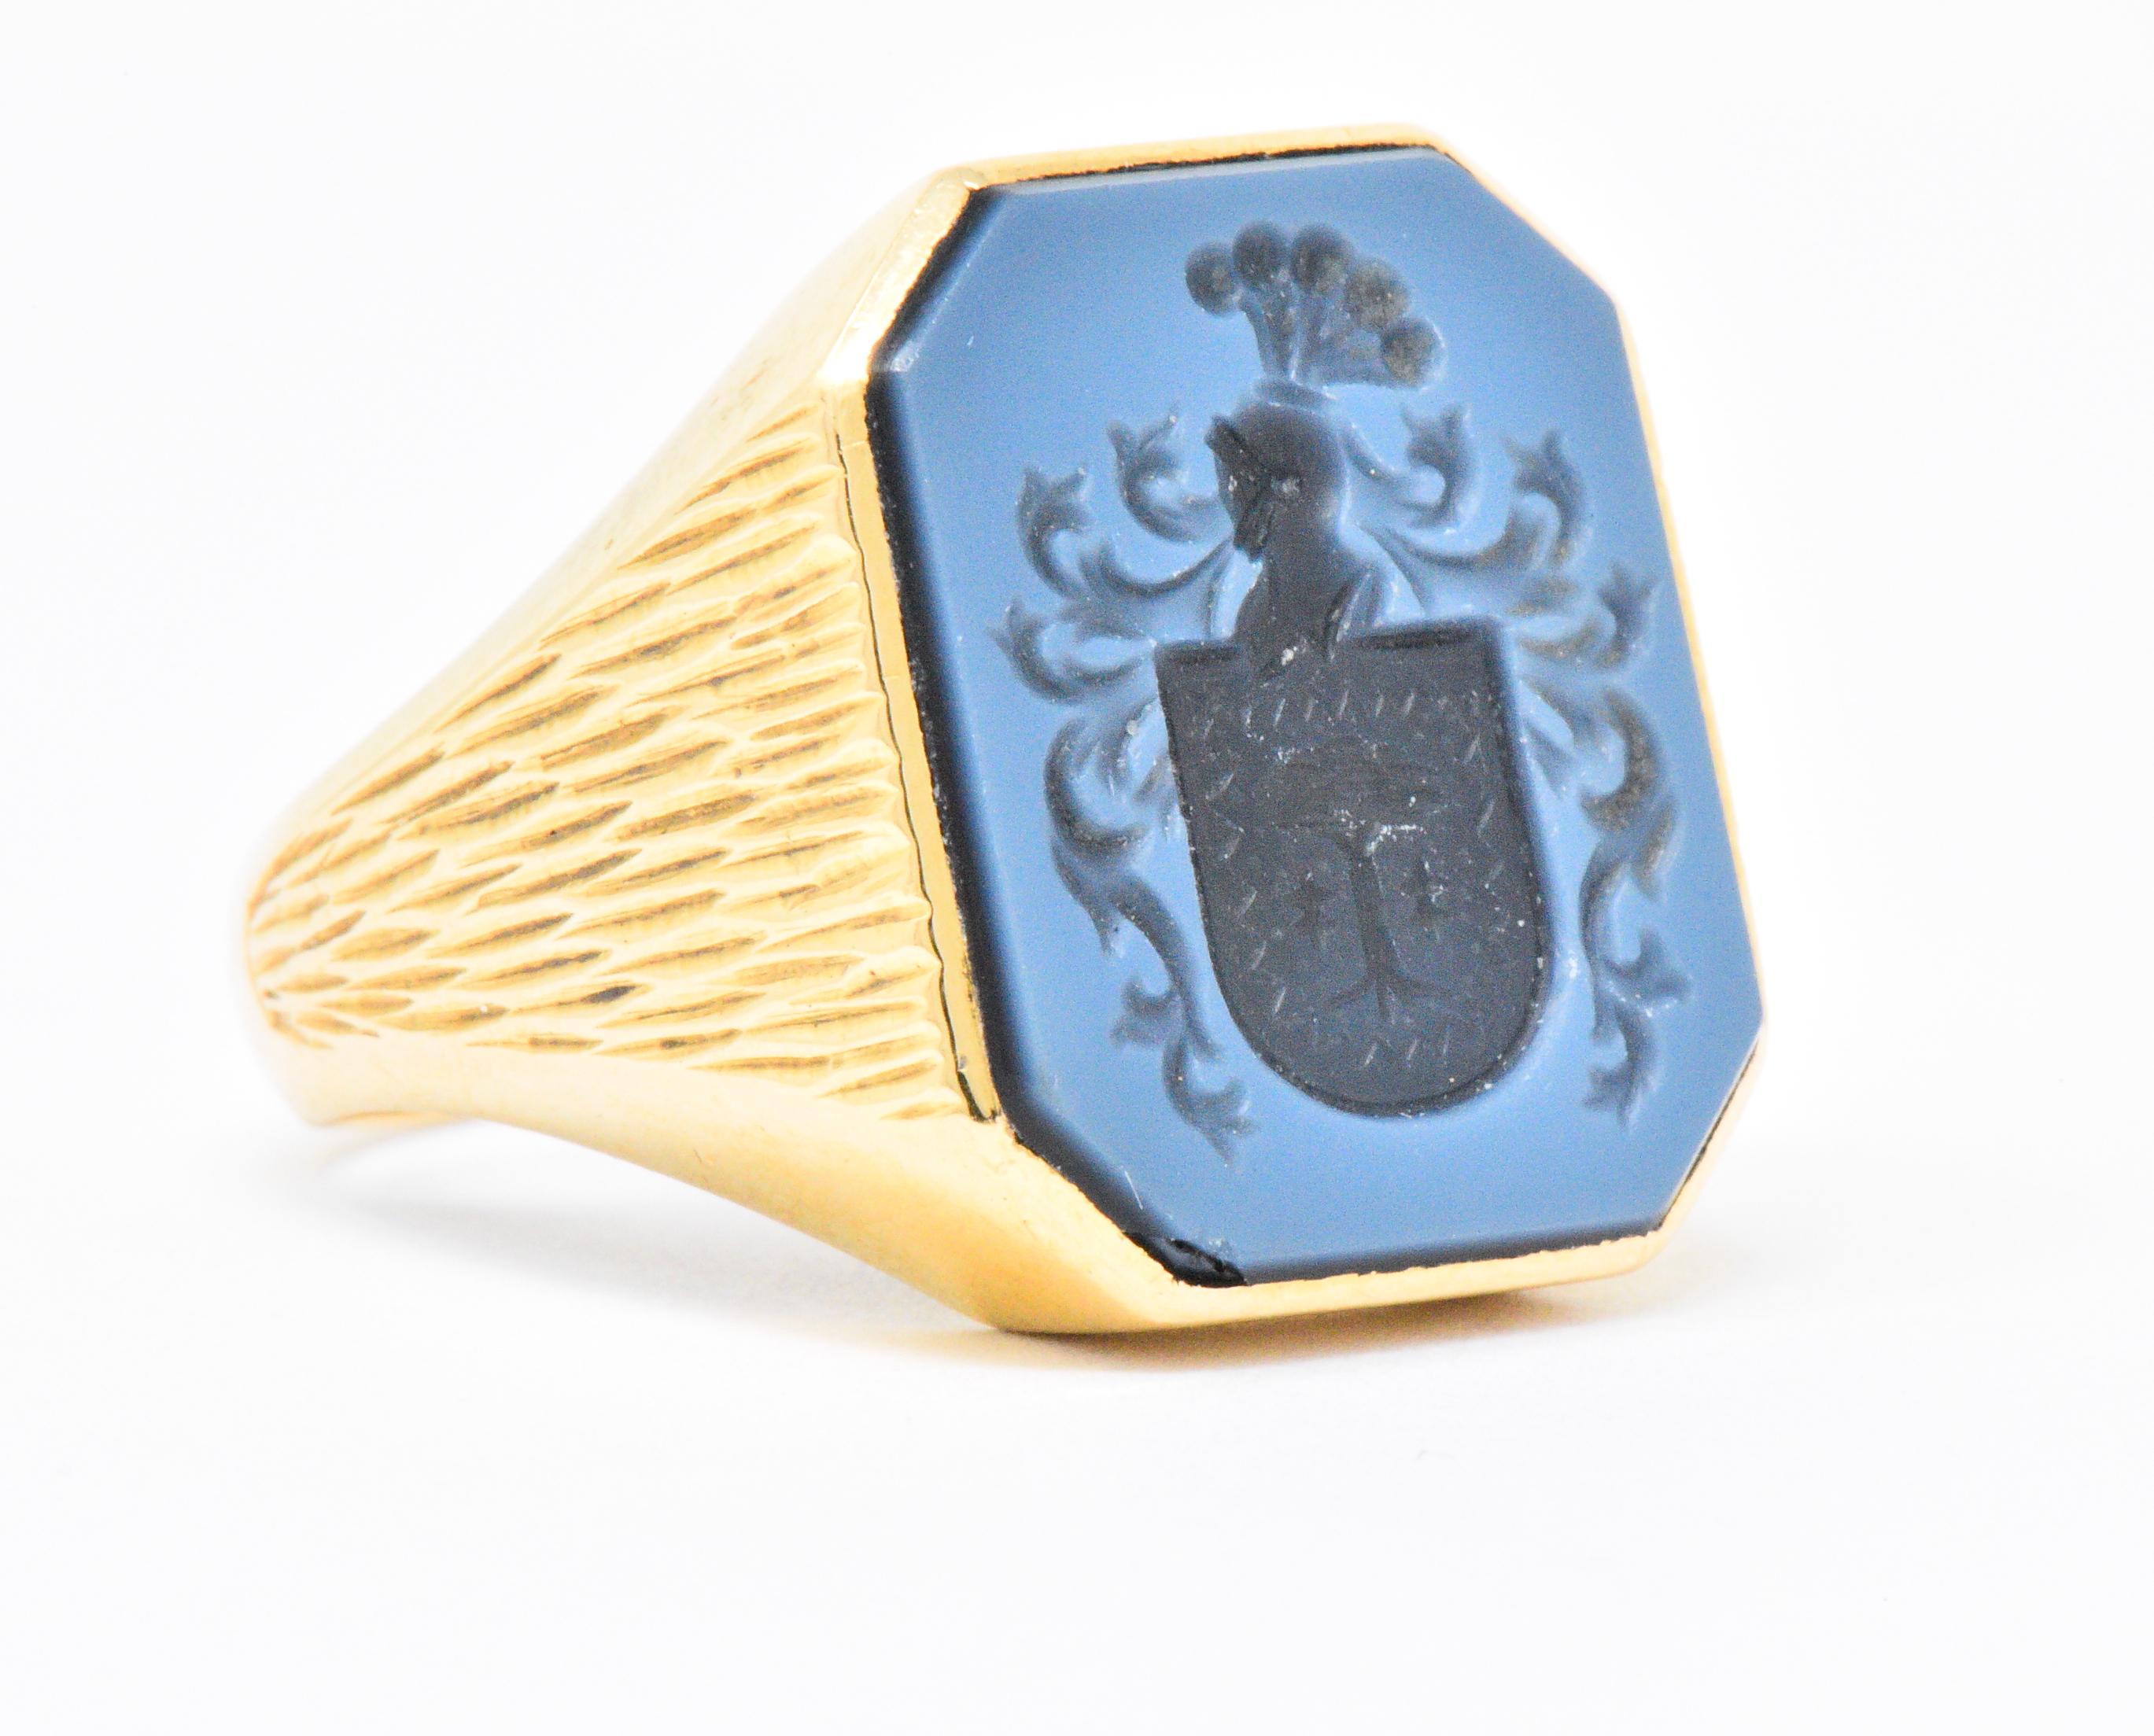 Centering a cut-corner banded onyx measuring approximately 18.0 x 14.6 mm

Intaglio depicting a plumed knights helmet atop a shield centering a tree with scrolling detail

A delicate bluish hue is produced by the thin layer of white over